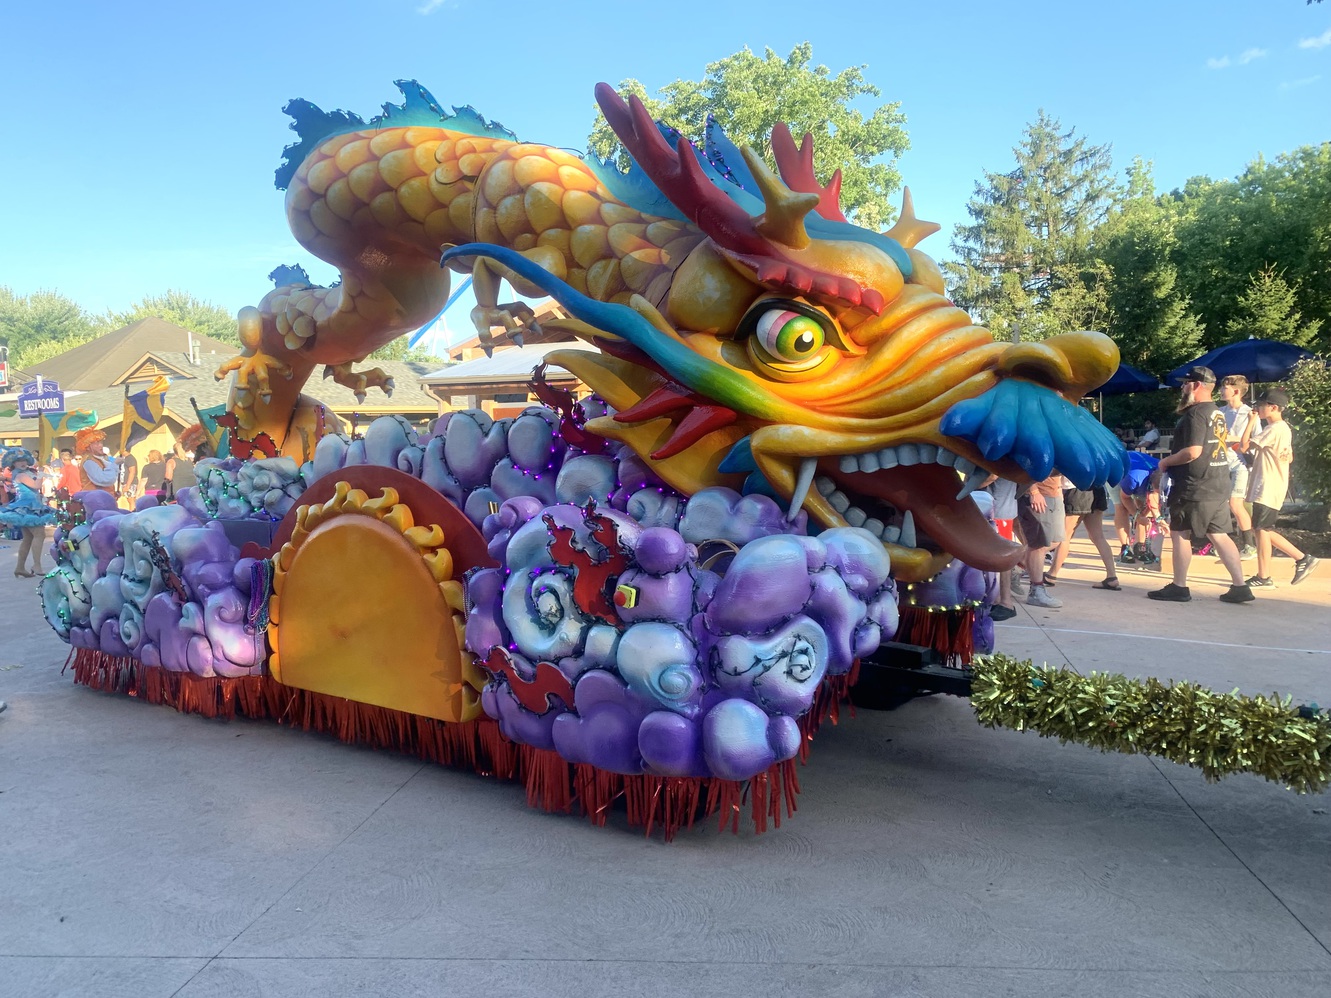 This
      is the Dragon float from Thailand.